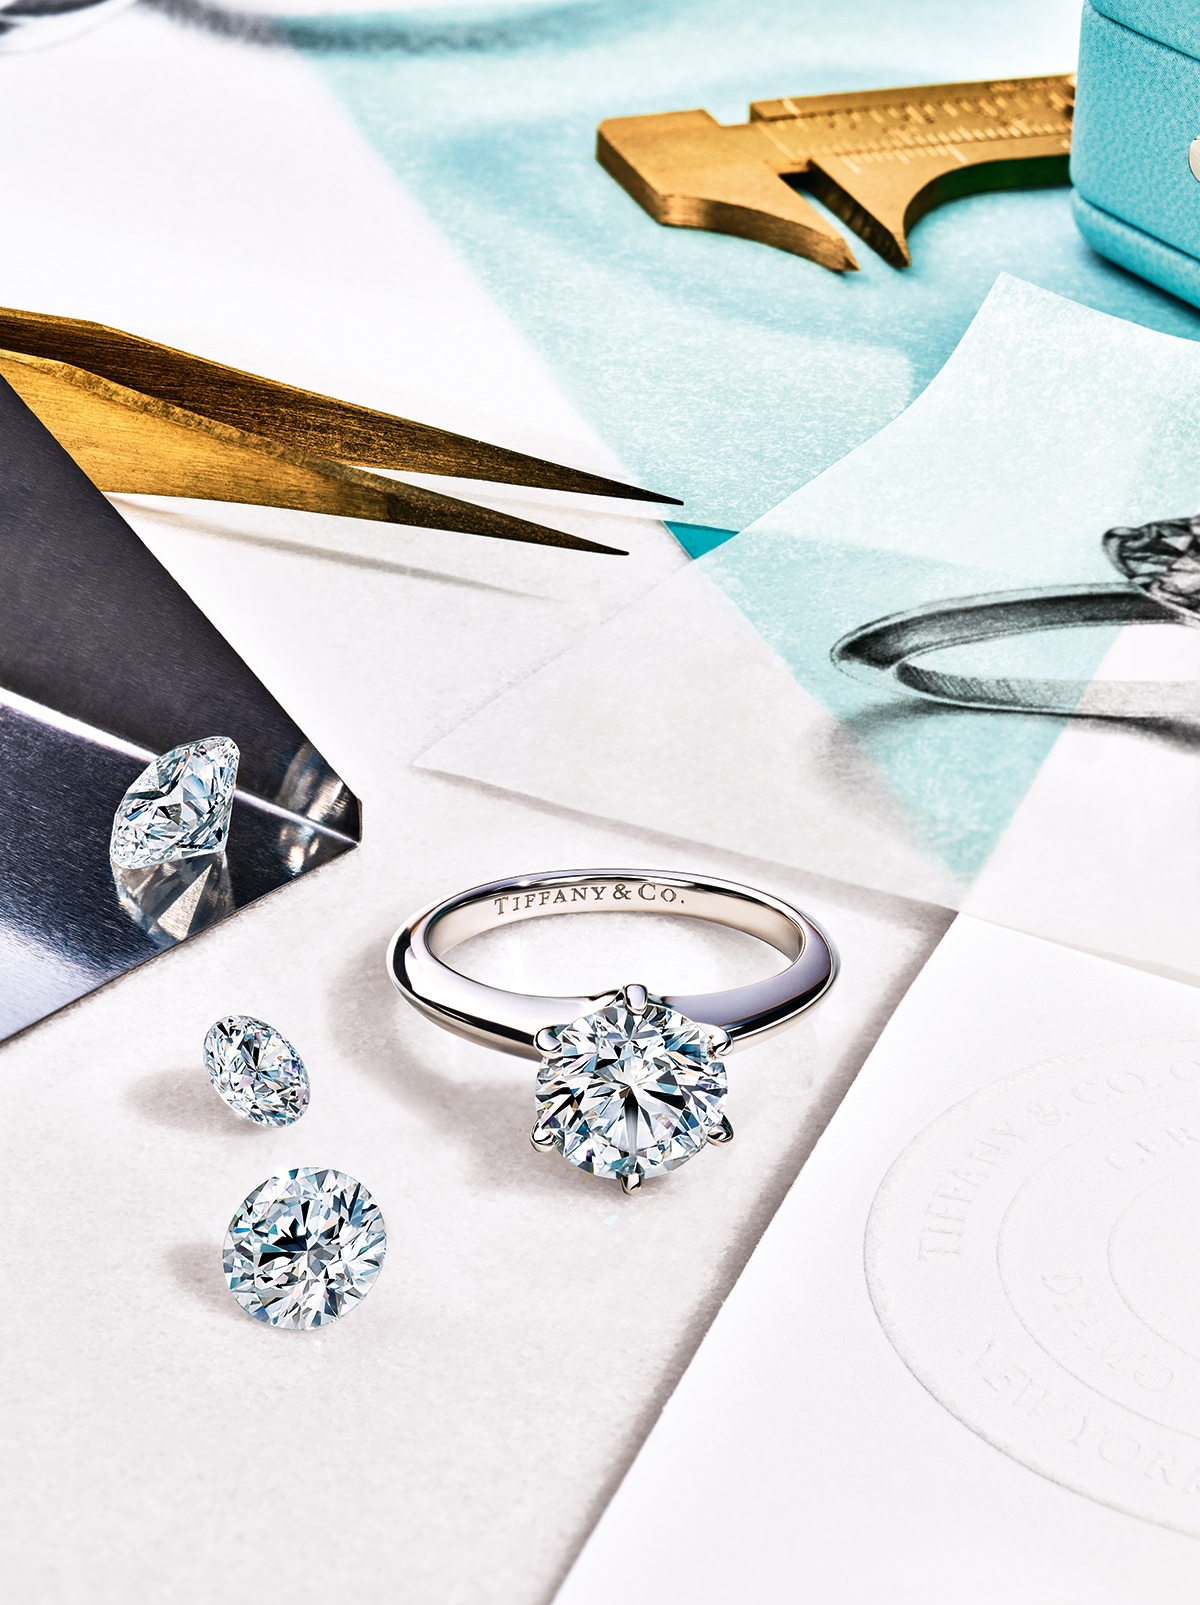 Tiffany & Co.'s Campaign Captures the Artisans behind Its Iconic Diamond  Ring